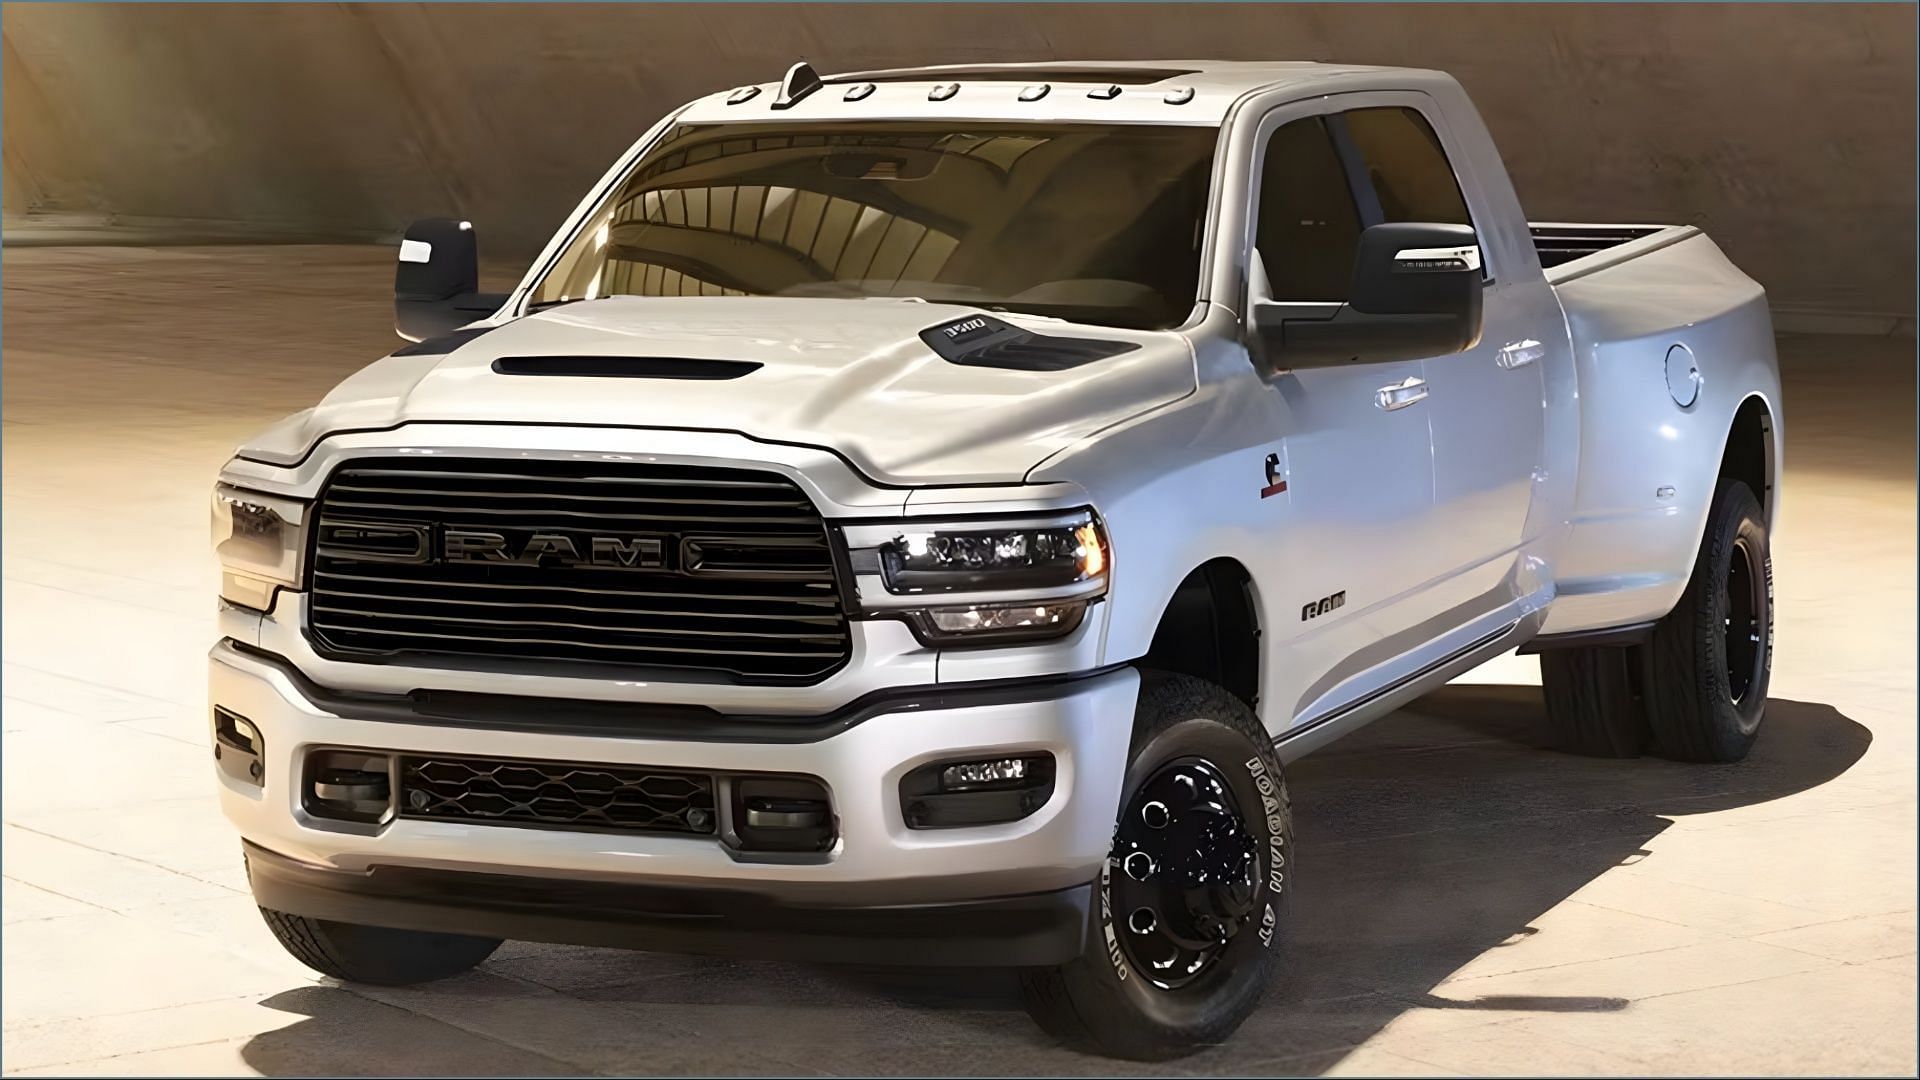 Cummins Inc. recalls RAM Trucks over an issue with the engine control software (Image via RAM)